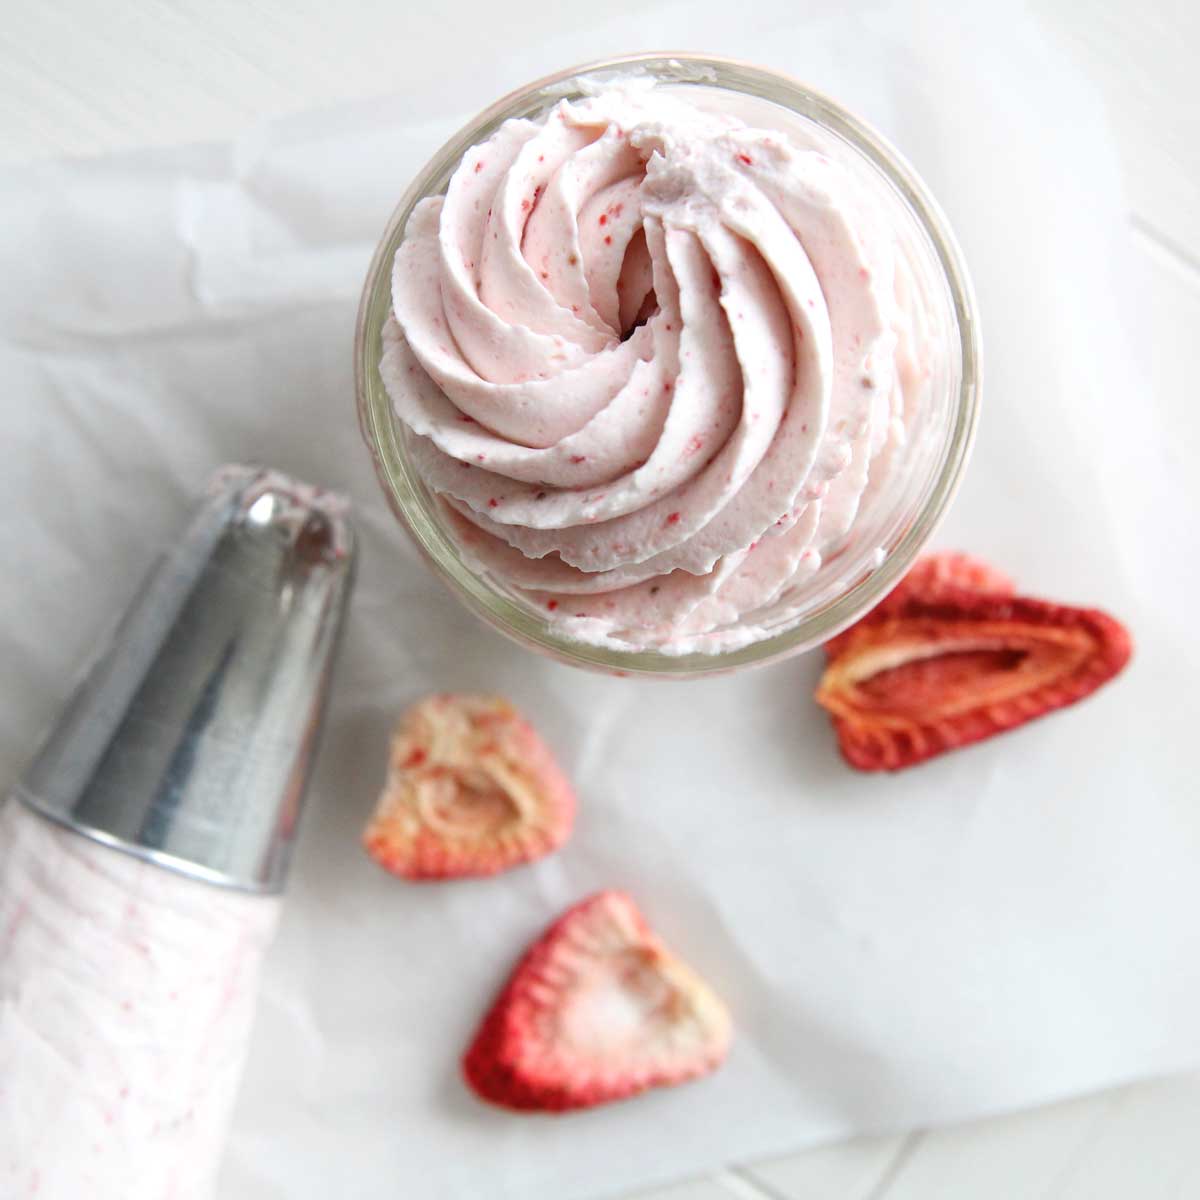 Low Carb Strawberry Whipped Cream Stabilized with Cream Cheese